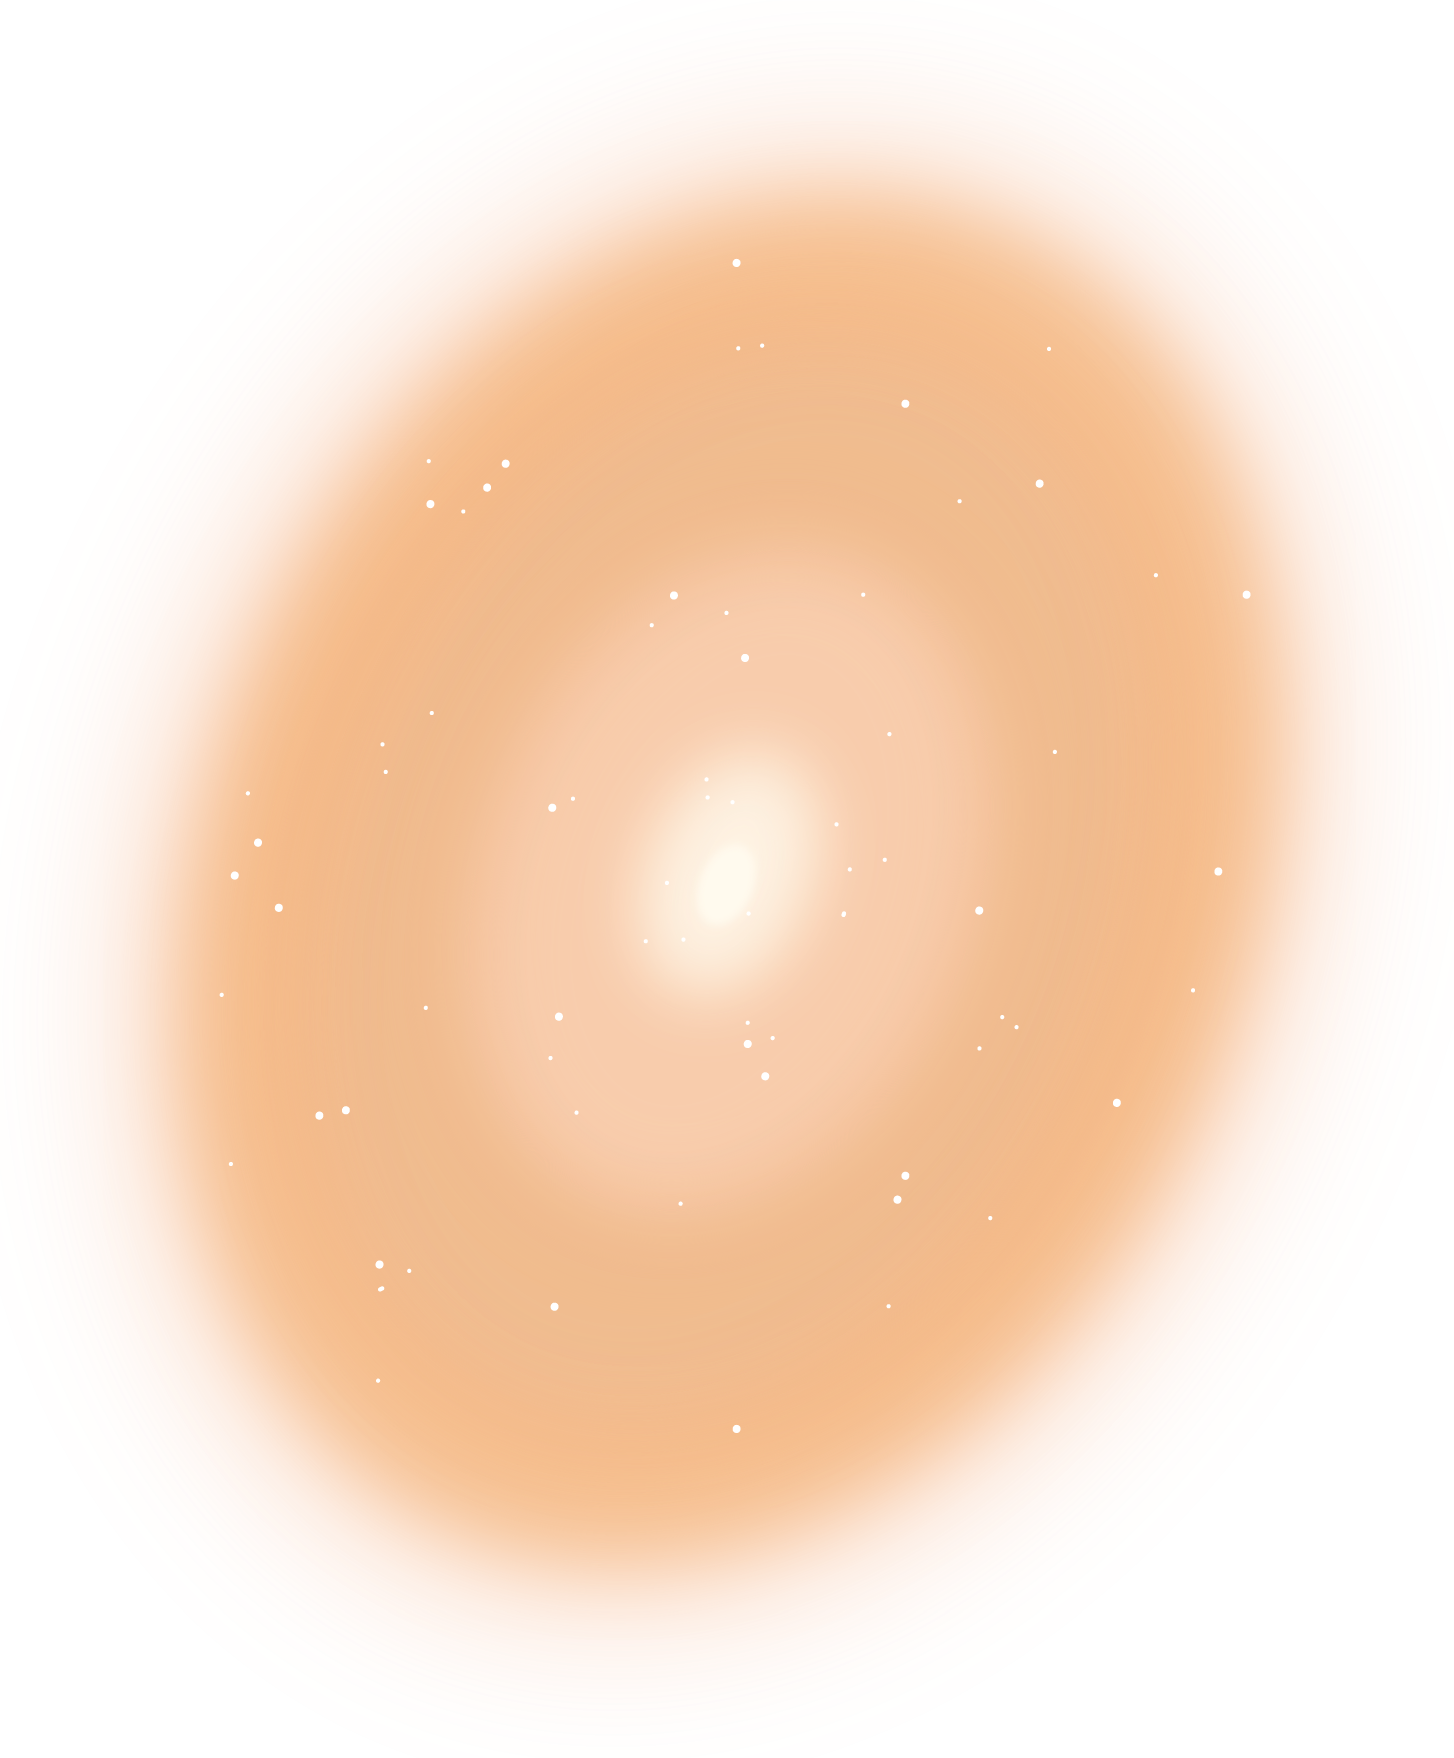 A diffuse oval is outlined by a light orange-ish yellow but gets progressively lighter in rings towards the center, a bright white spot surrounded by a small ring of white haze. White dots representing stars speckle the image.